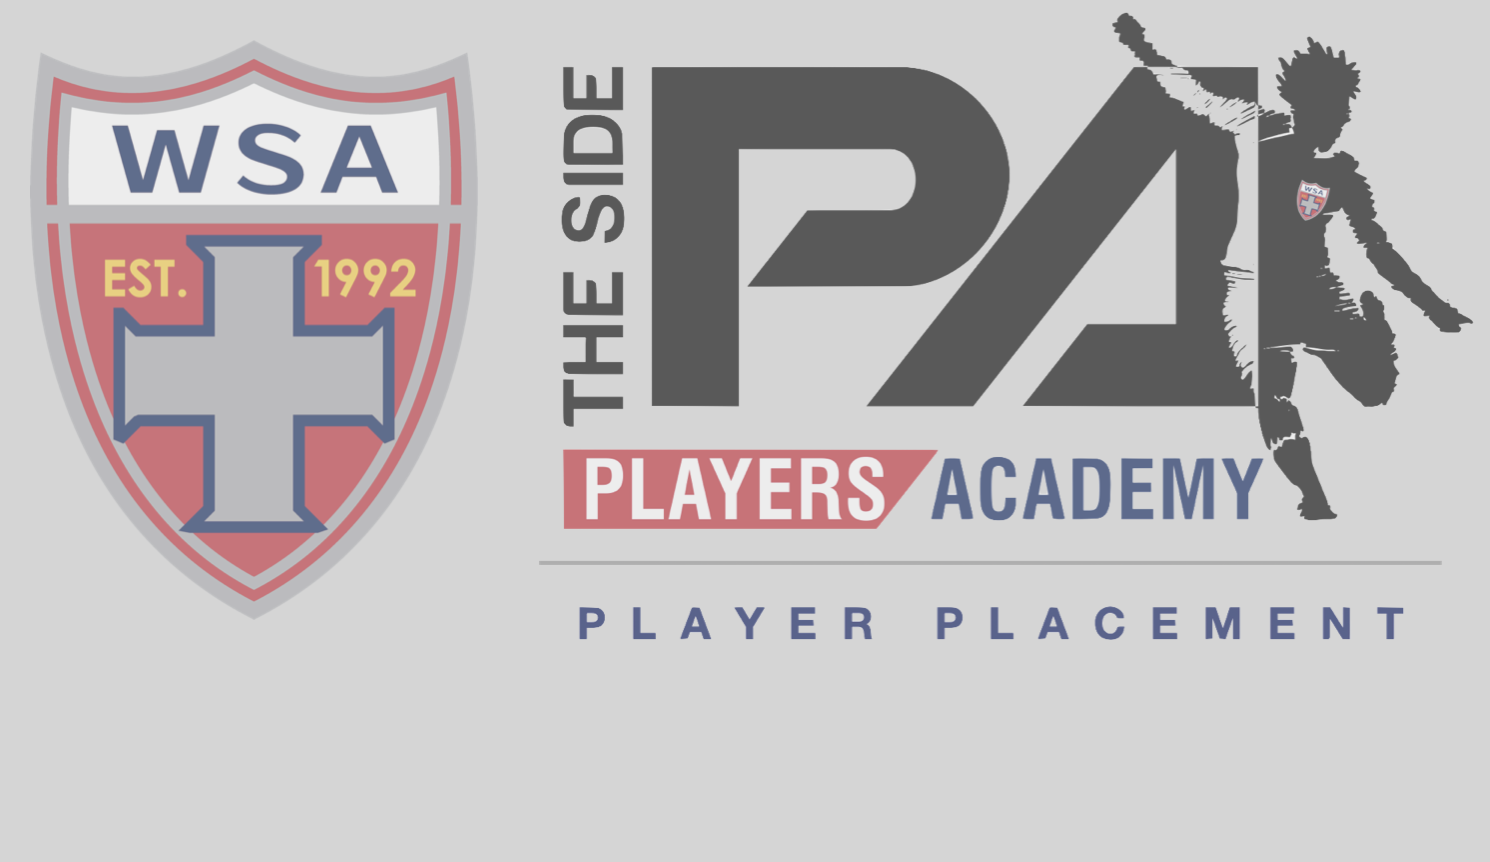 THE SIDE PLAYER PLACEMENT & TRYOUT INFO 2022 